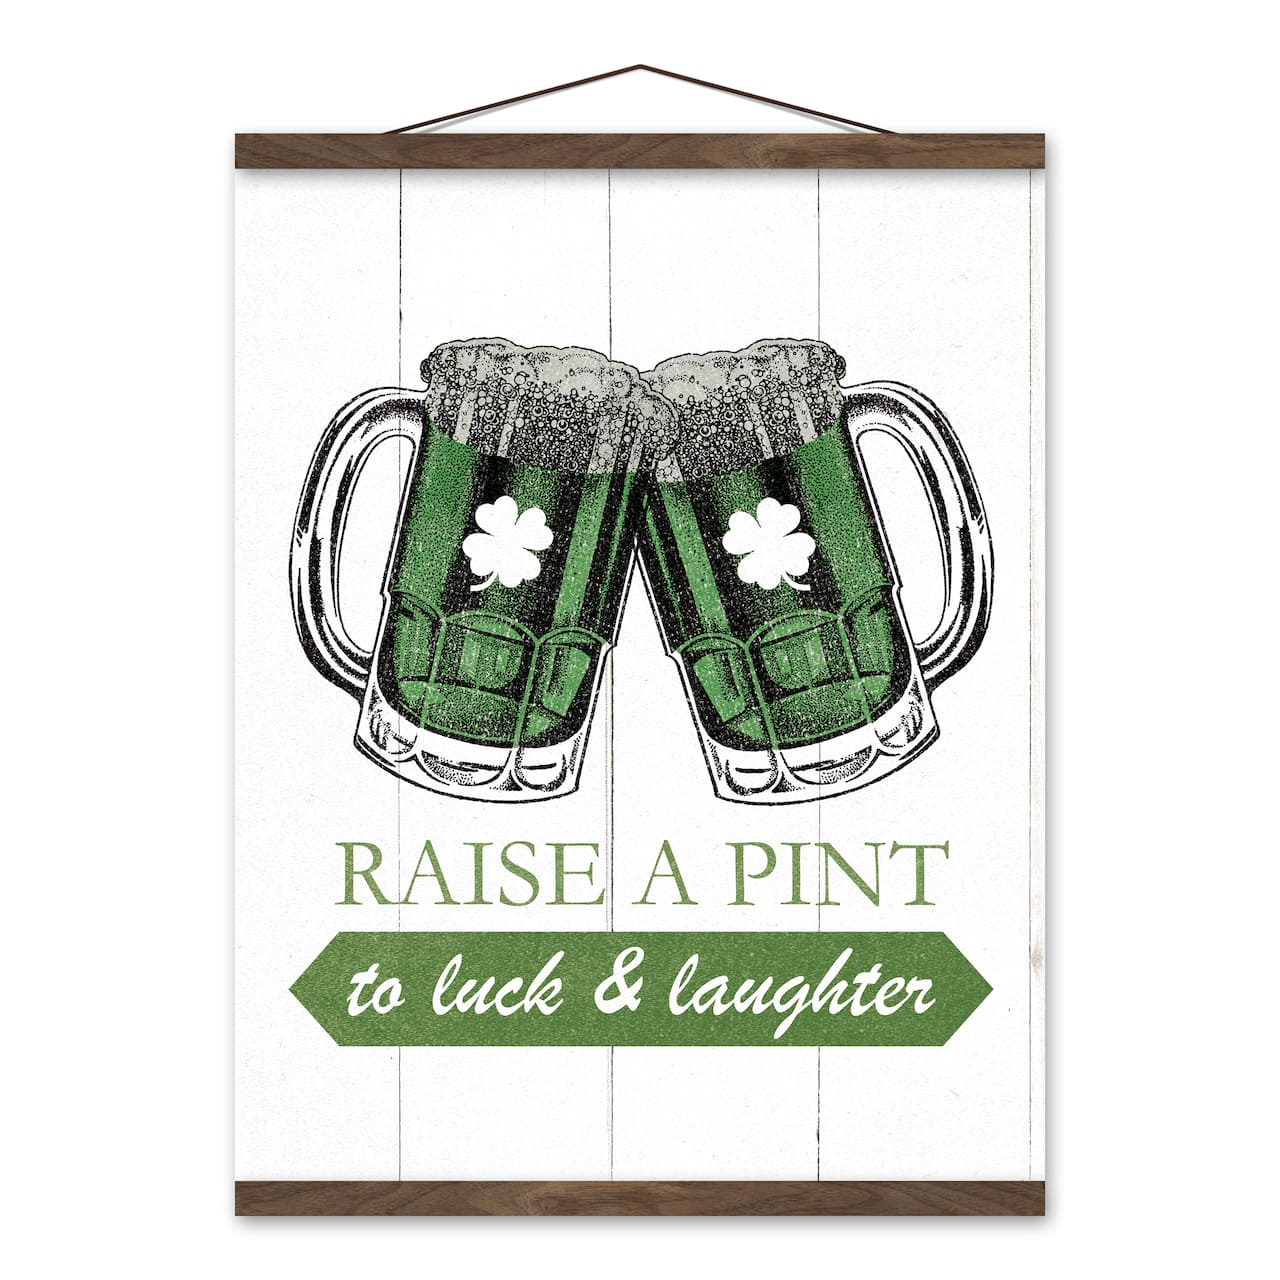 A Pint to Luck &#x26; Laughter Teak Hanging Canvas